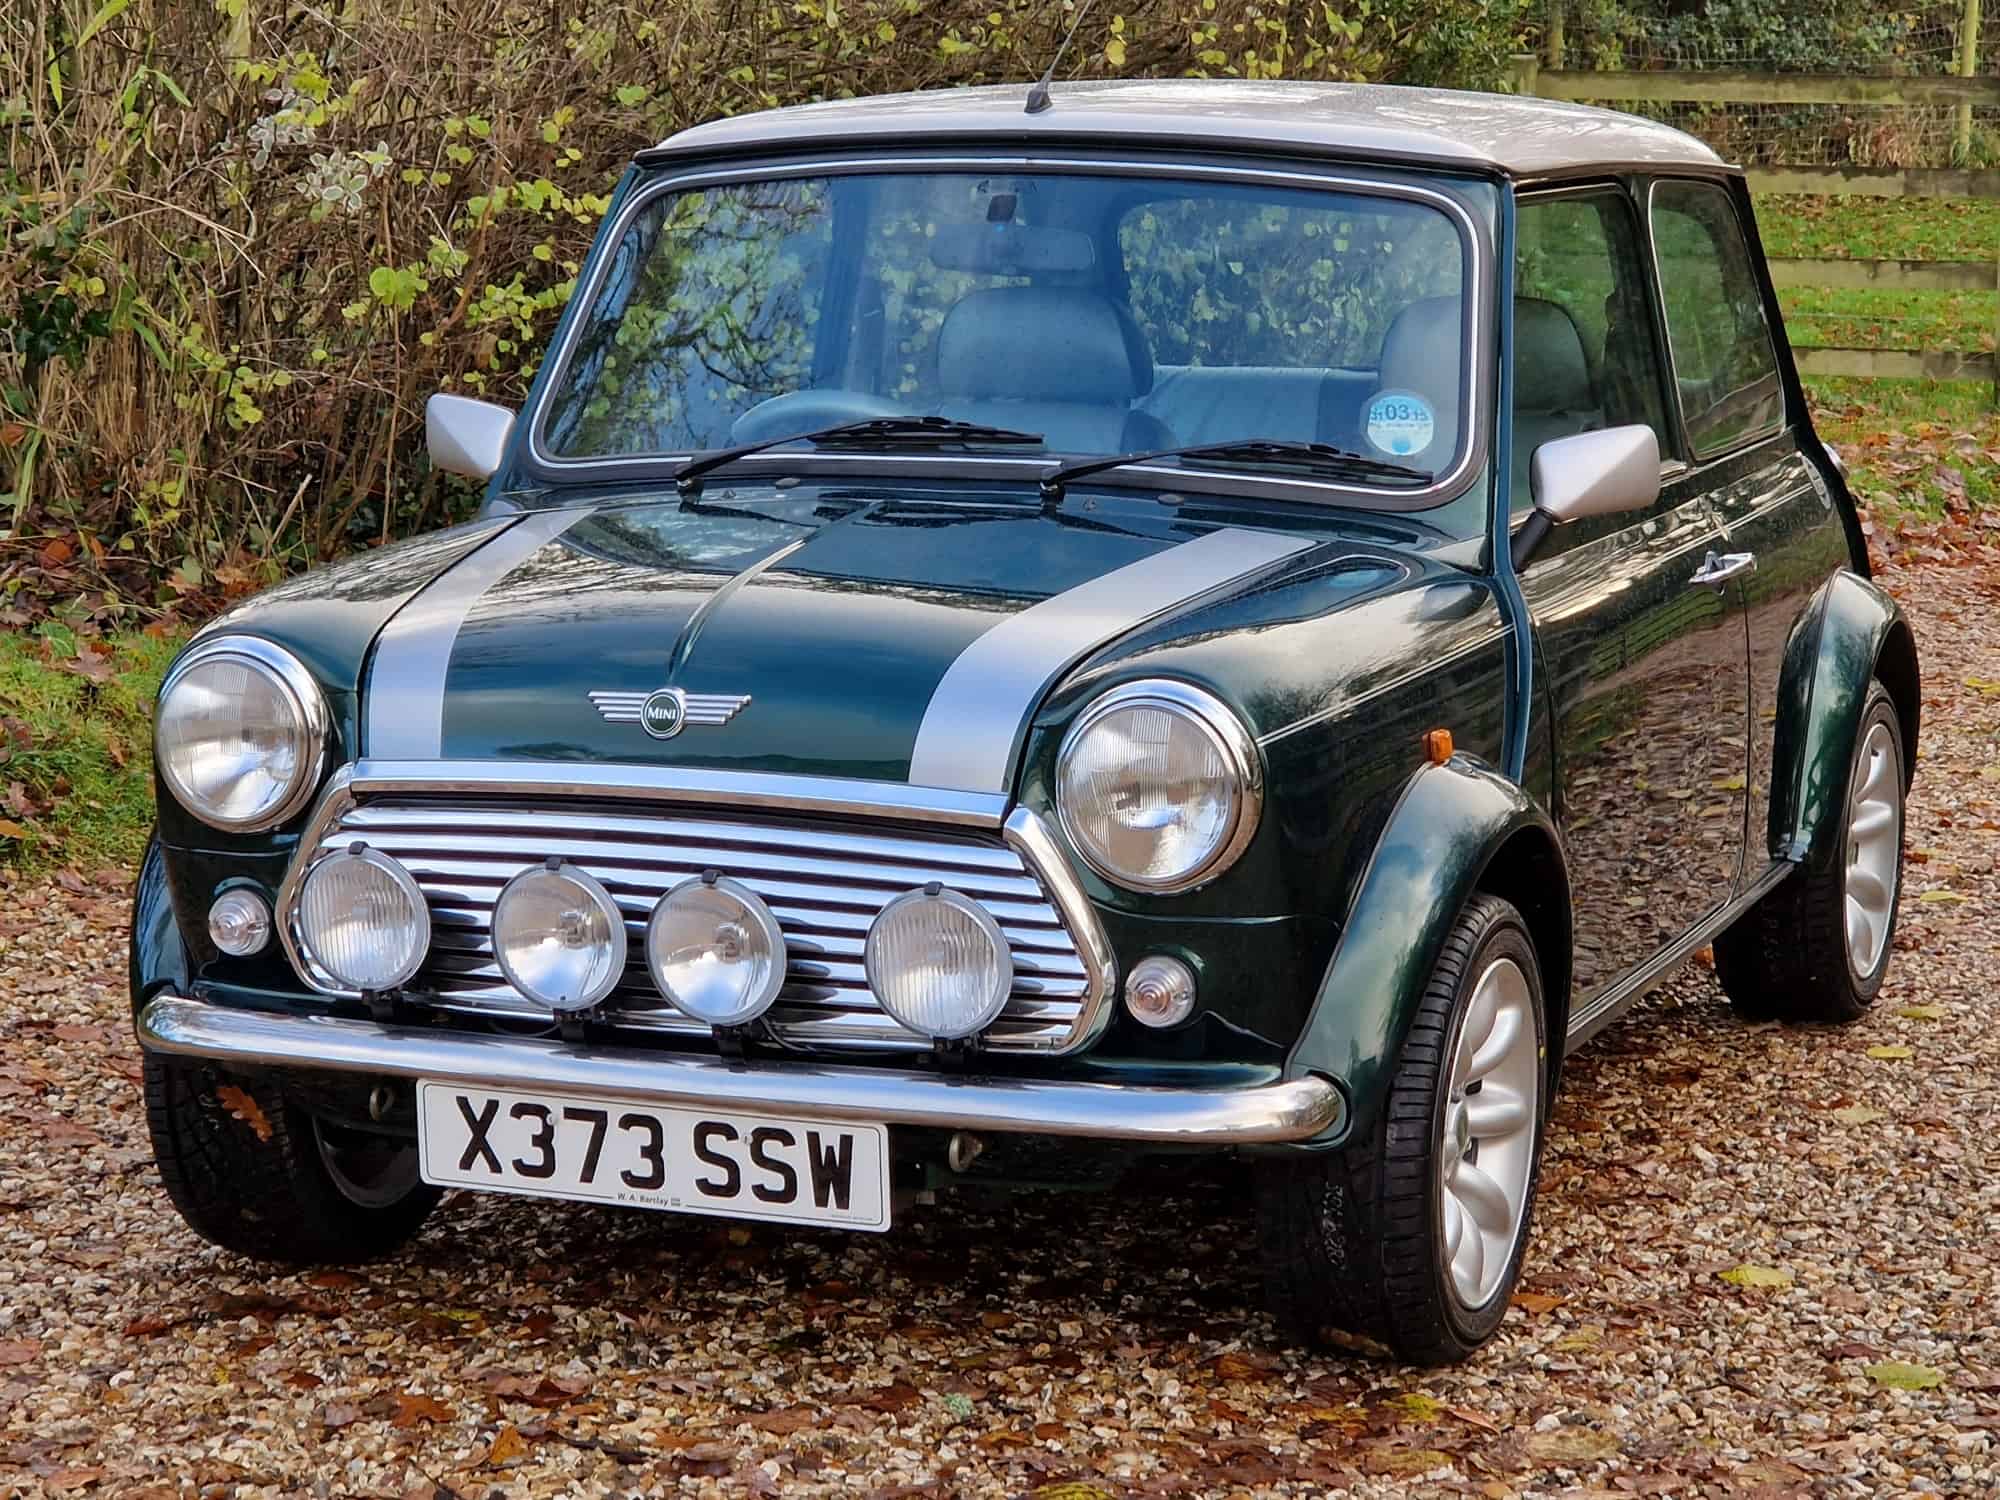 ** NOW SOLD ** 2001 Rover Mini Cooper Sport ‘ONE OWNER’ And Just 6650 Miles!